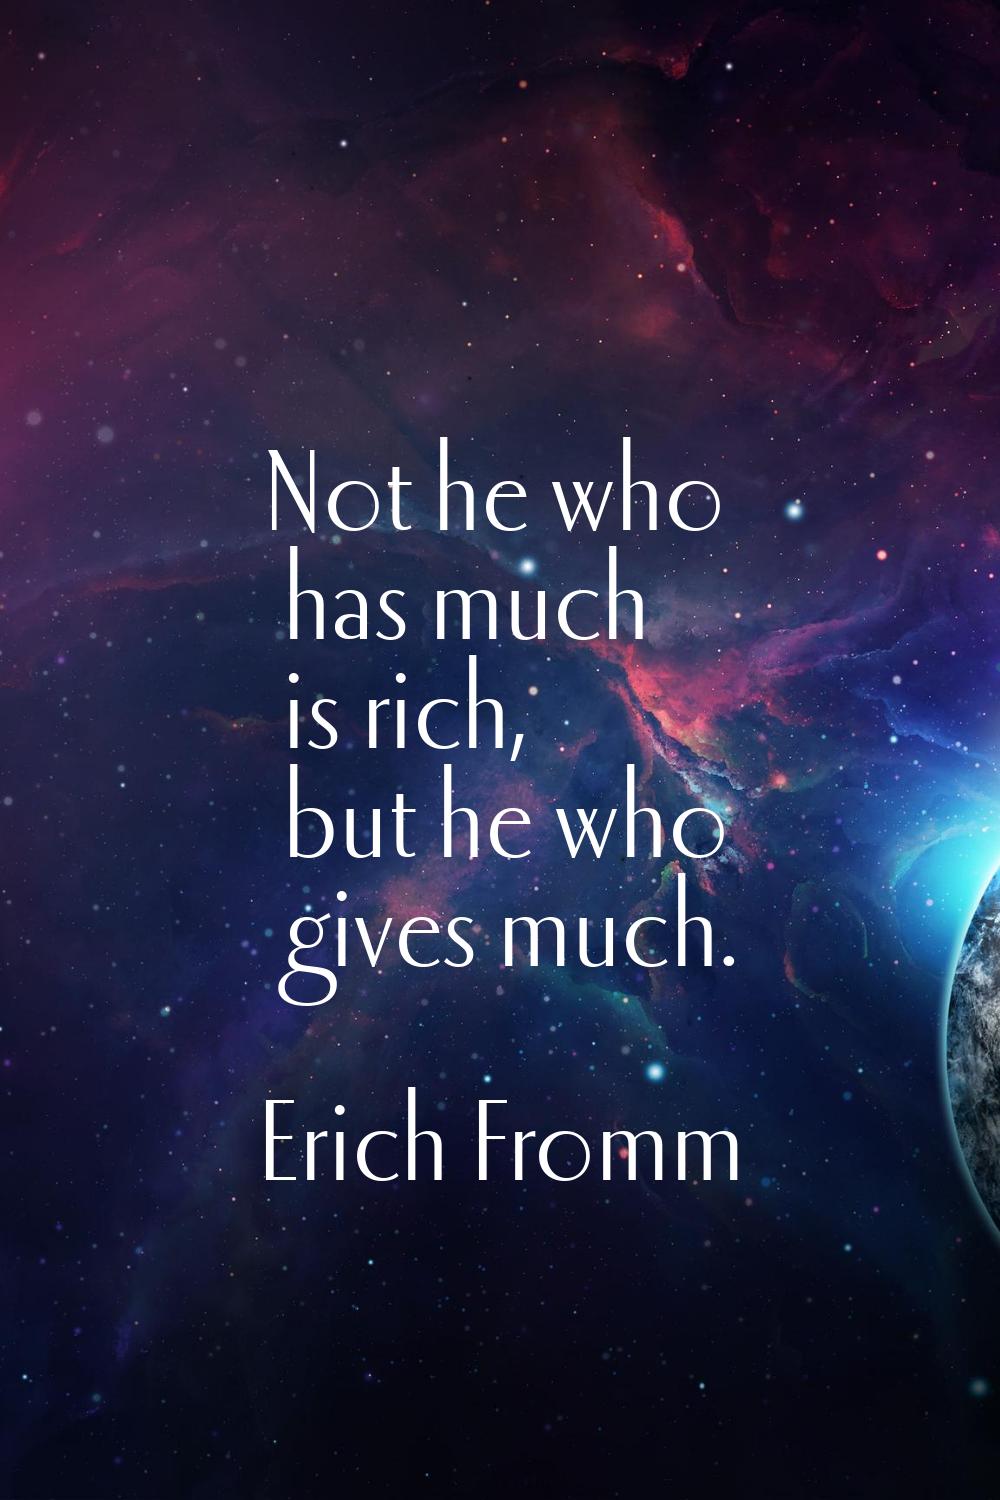 Not he who has much is rich, but he who gives much.